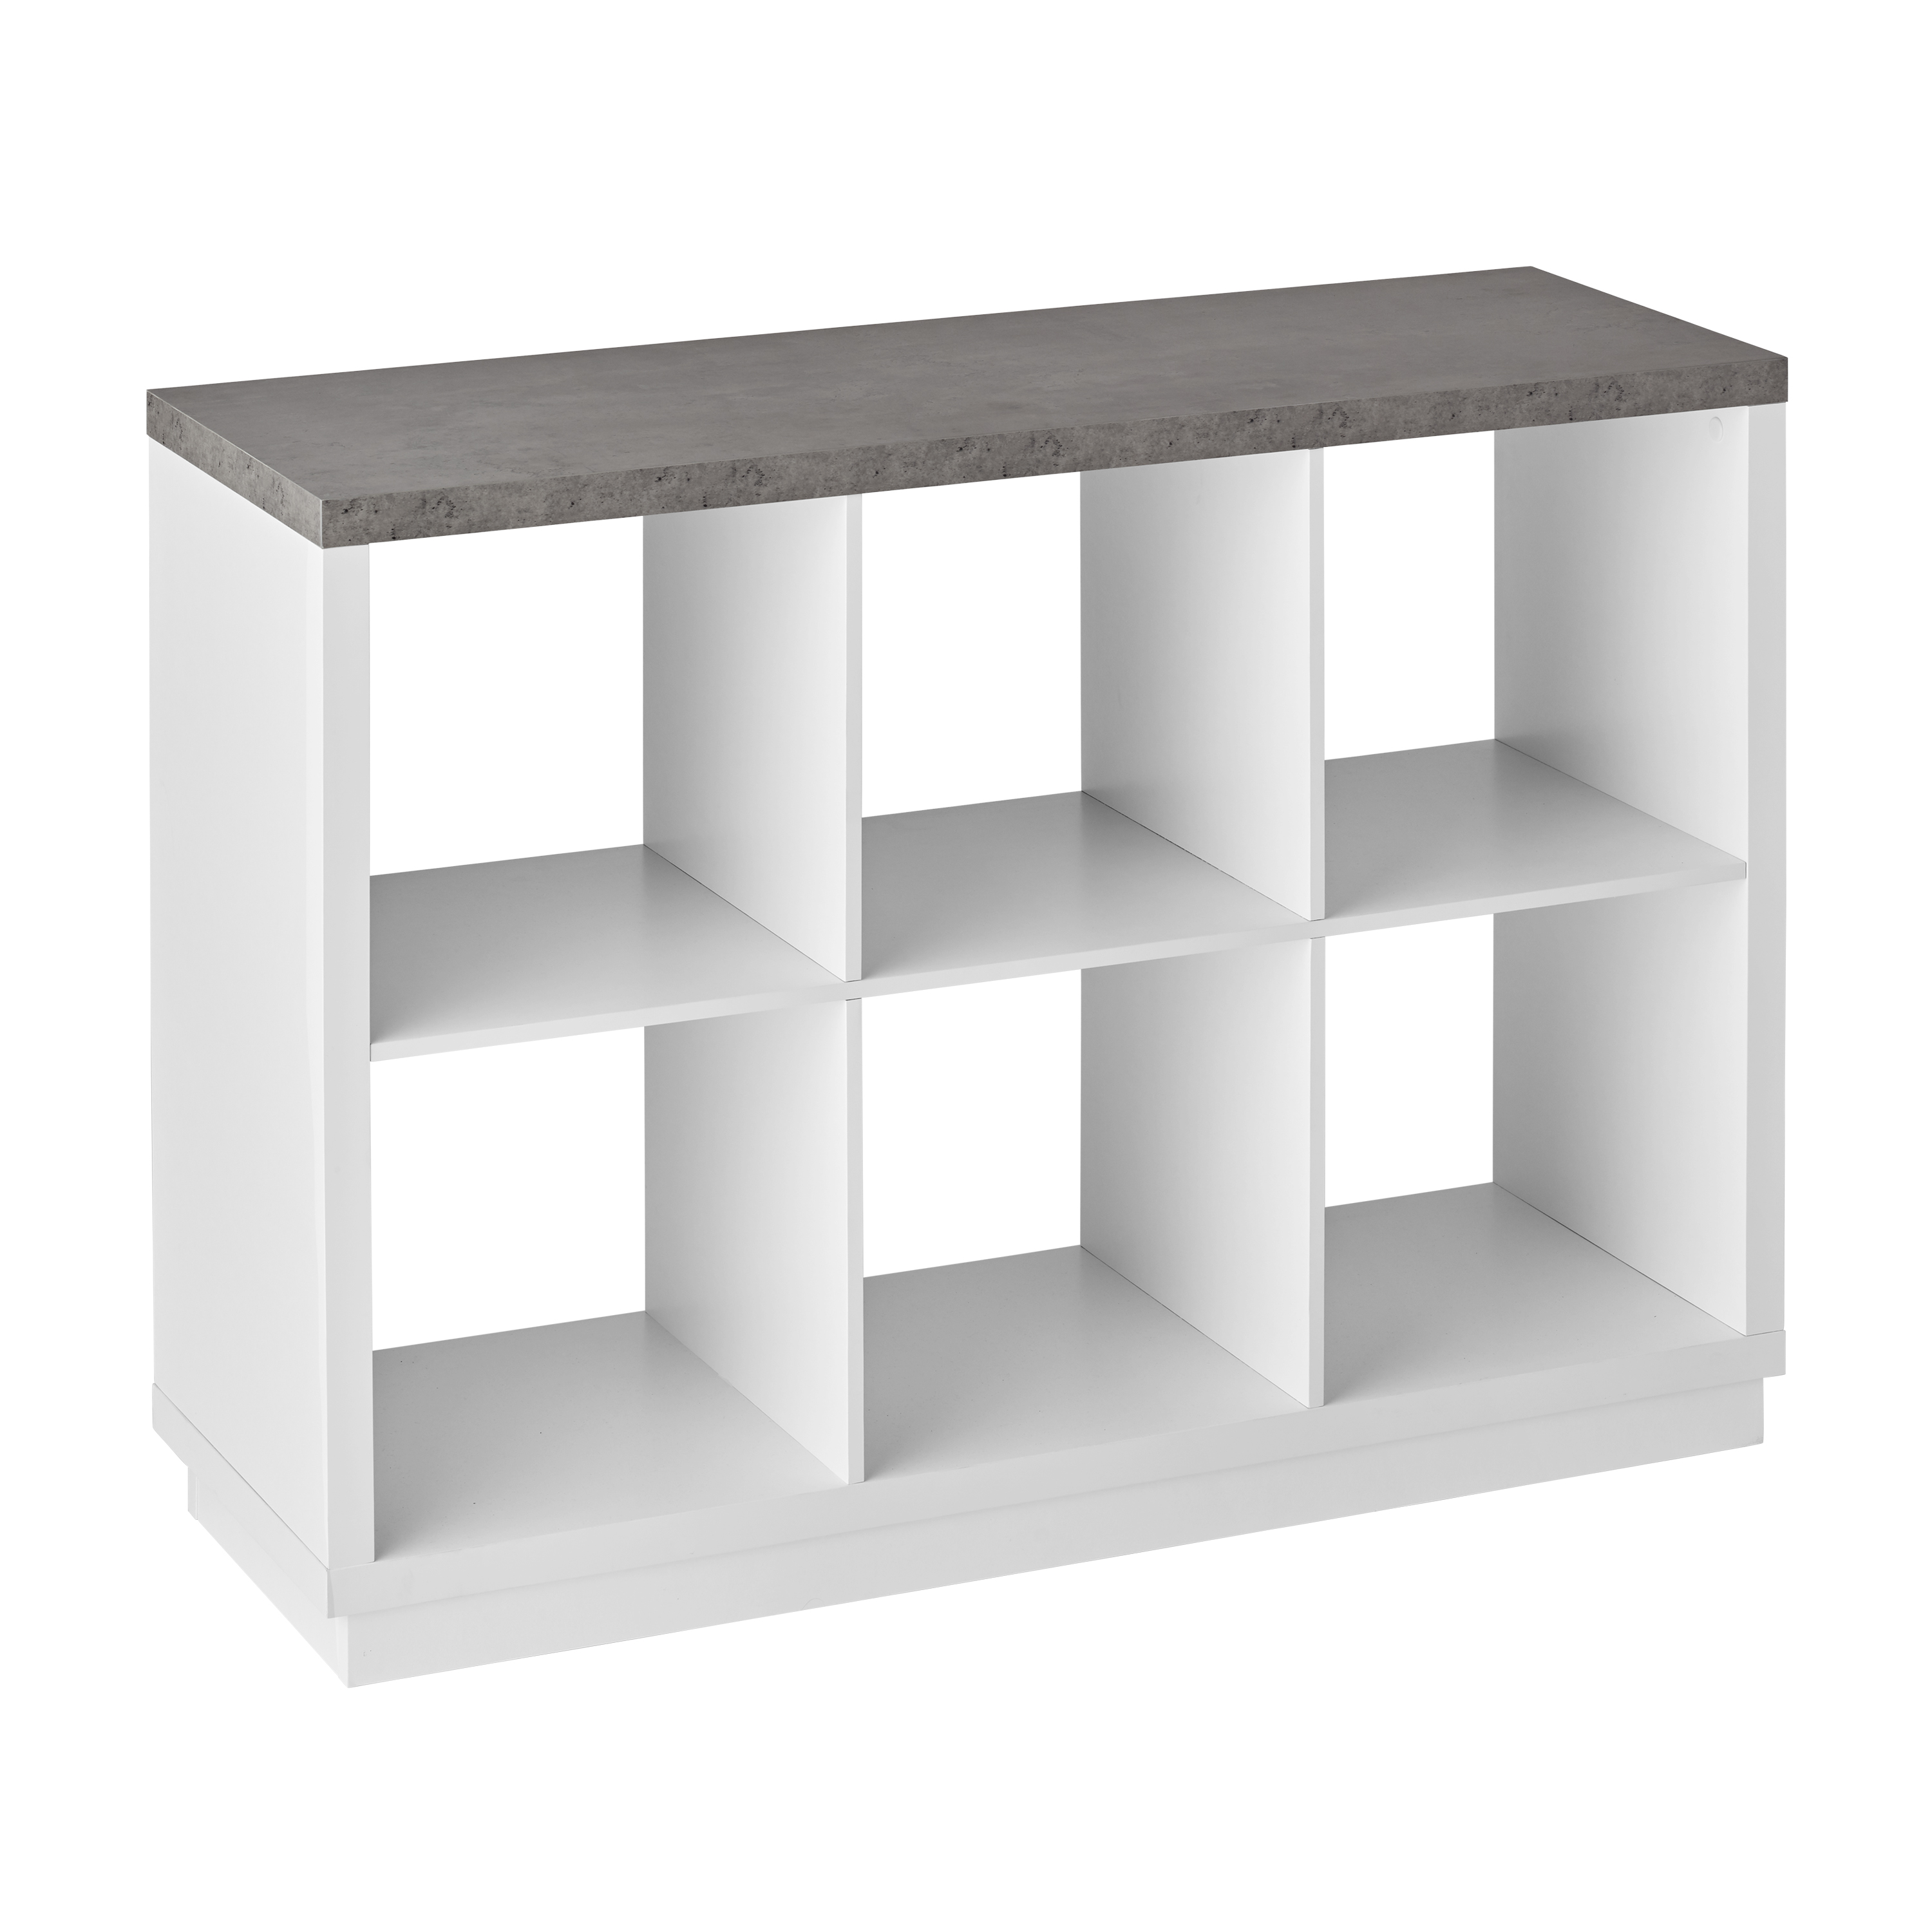 Build Your Own Furniture 6-Cube Organizer, White with Faux Concrete Top - image 2 of 6